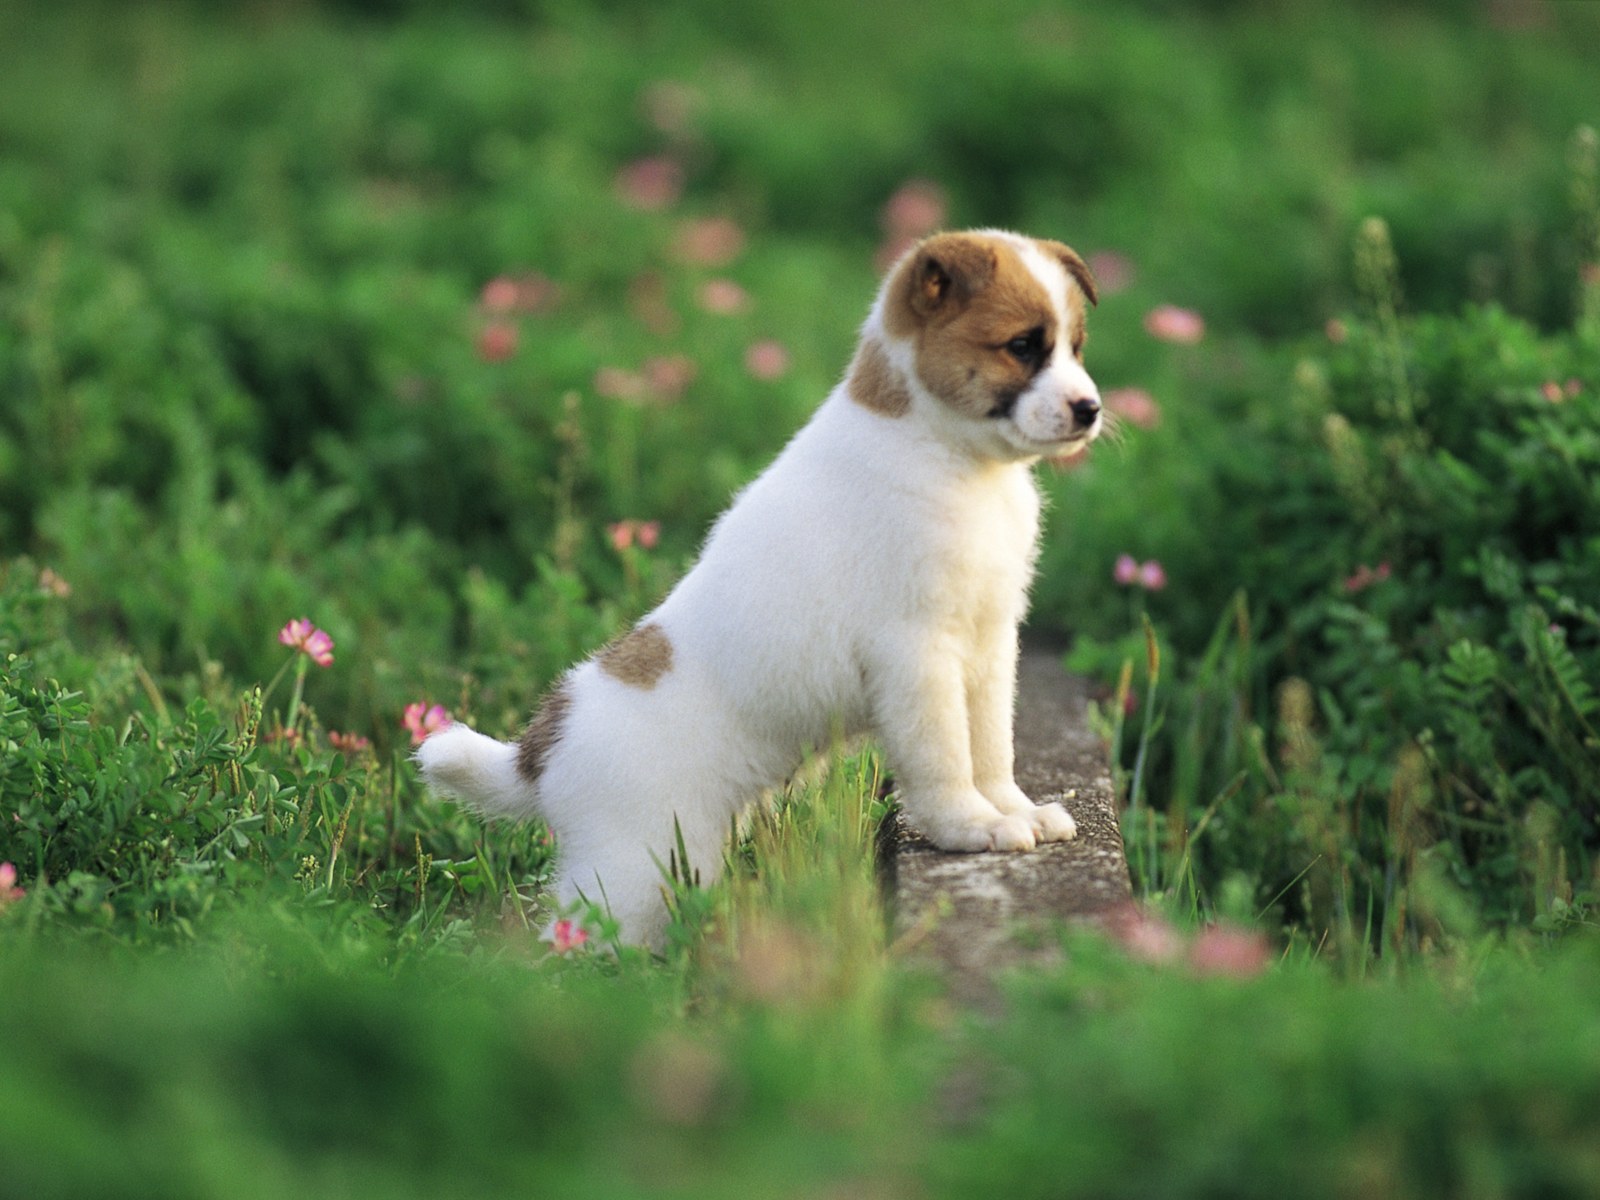 Lovable Puppy in Garden Backgrounds